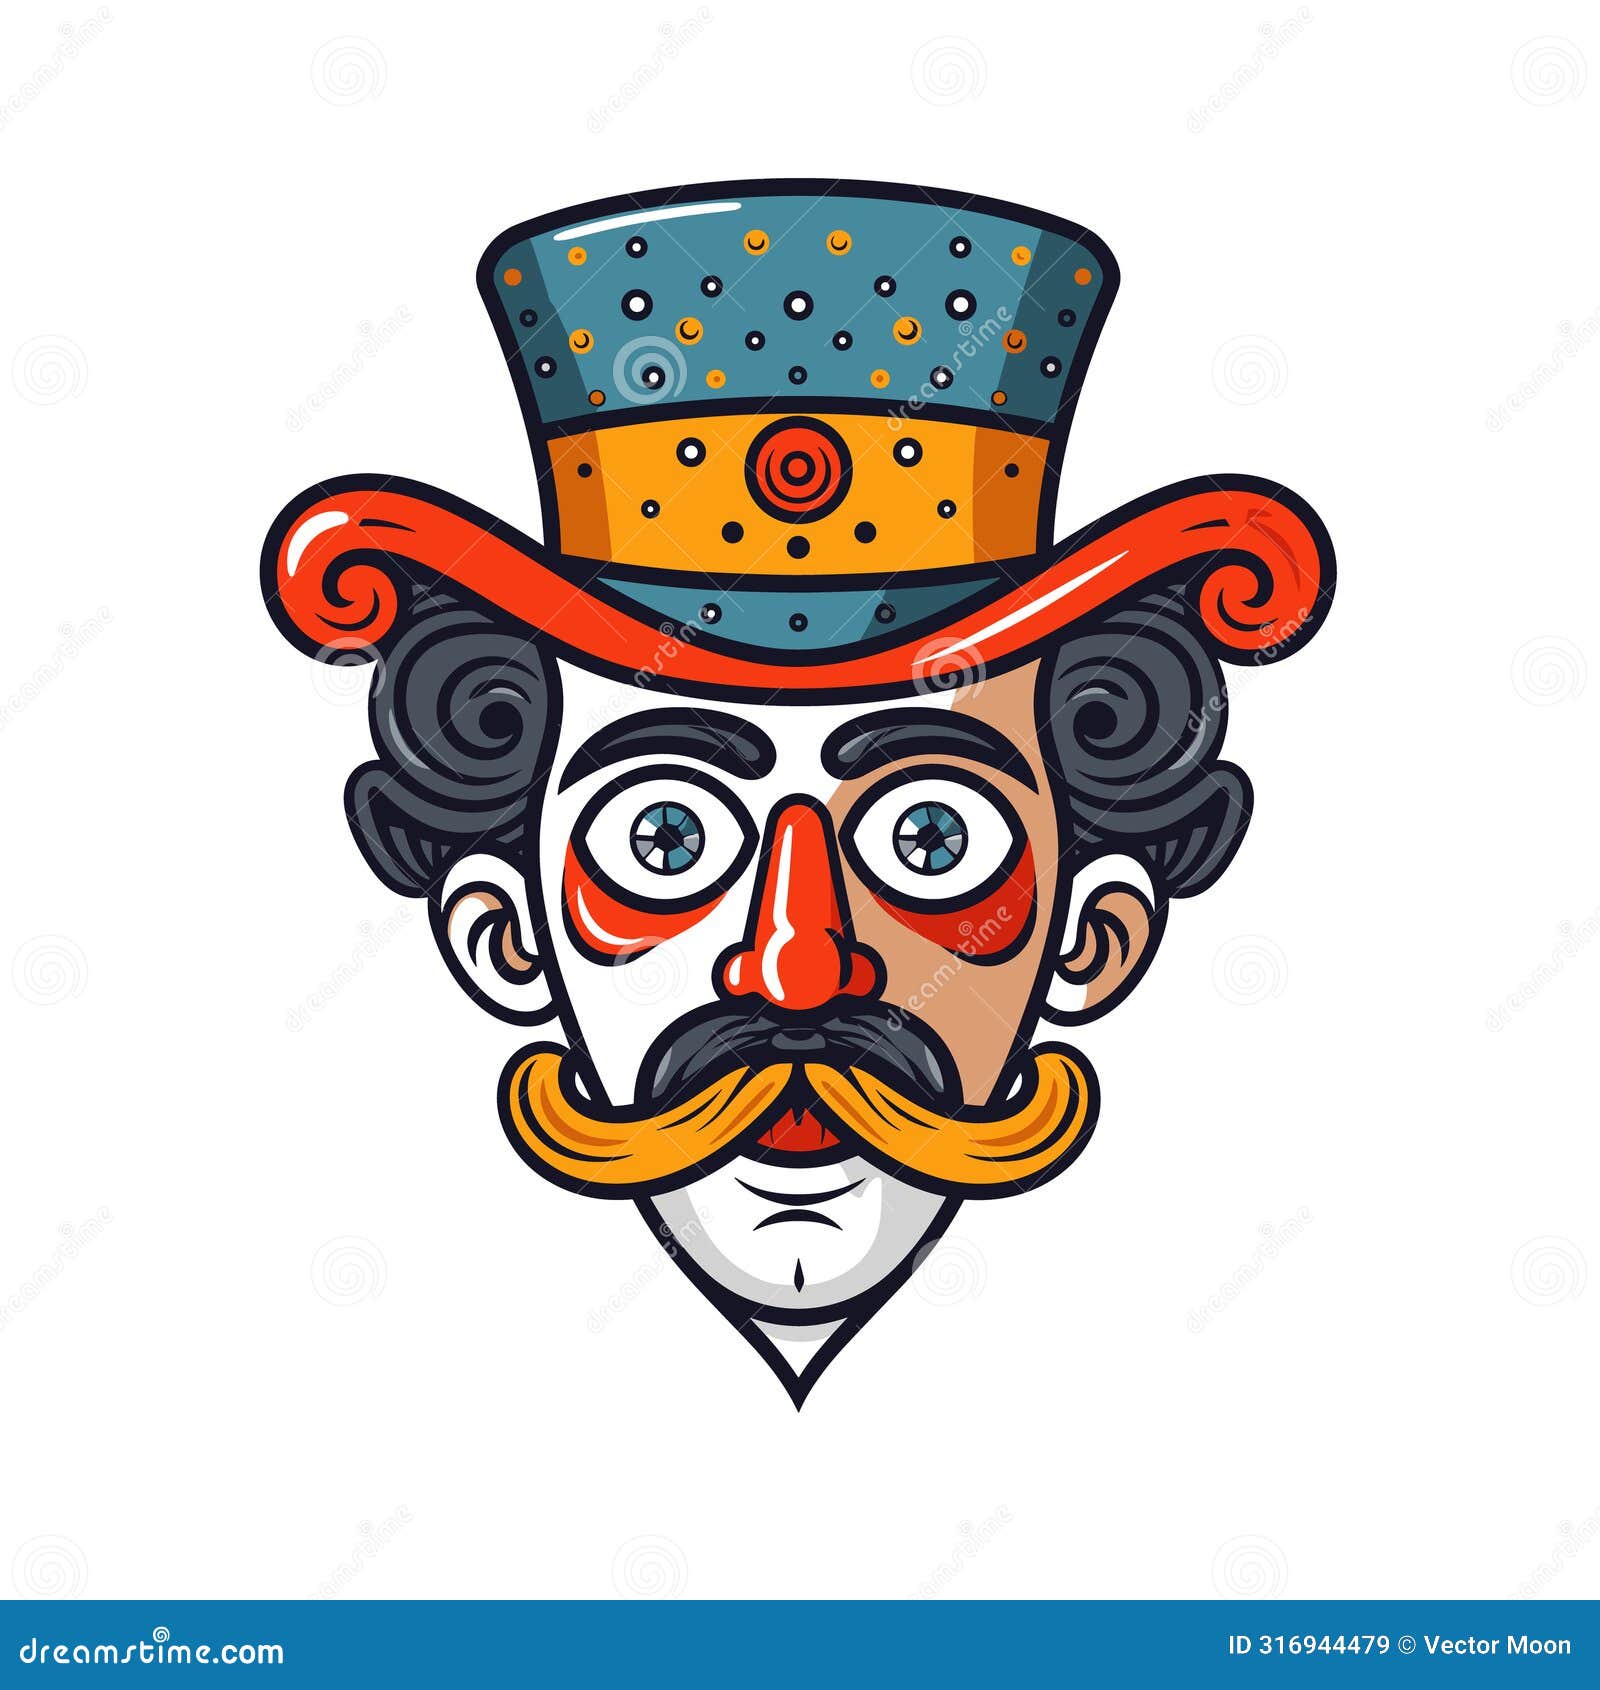 stylized male face sporting curled mustache, whimsical top hat, dramatic facial expression. circus